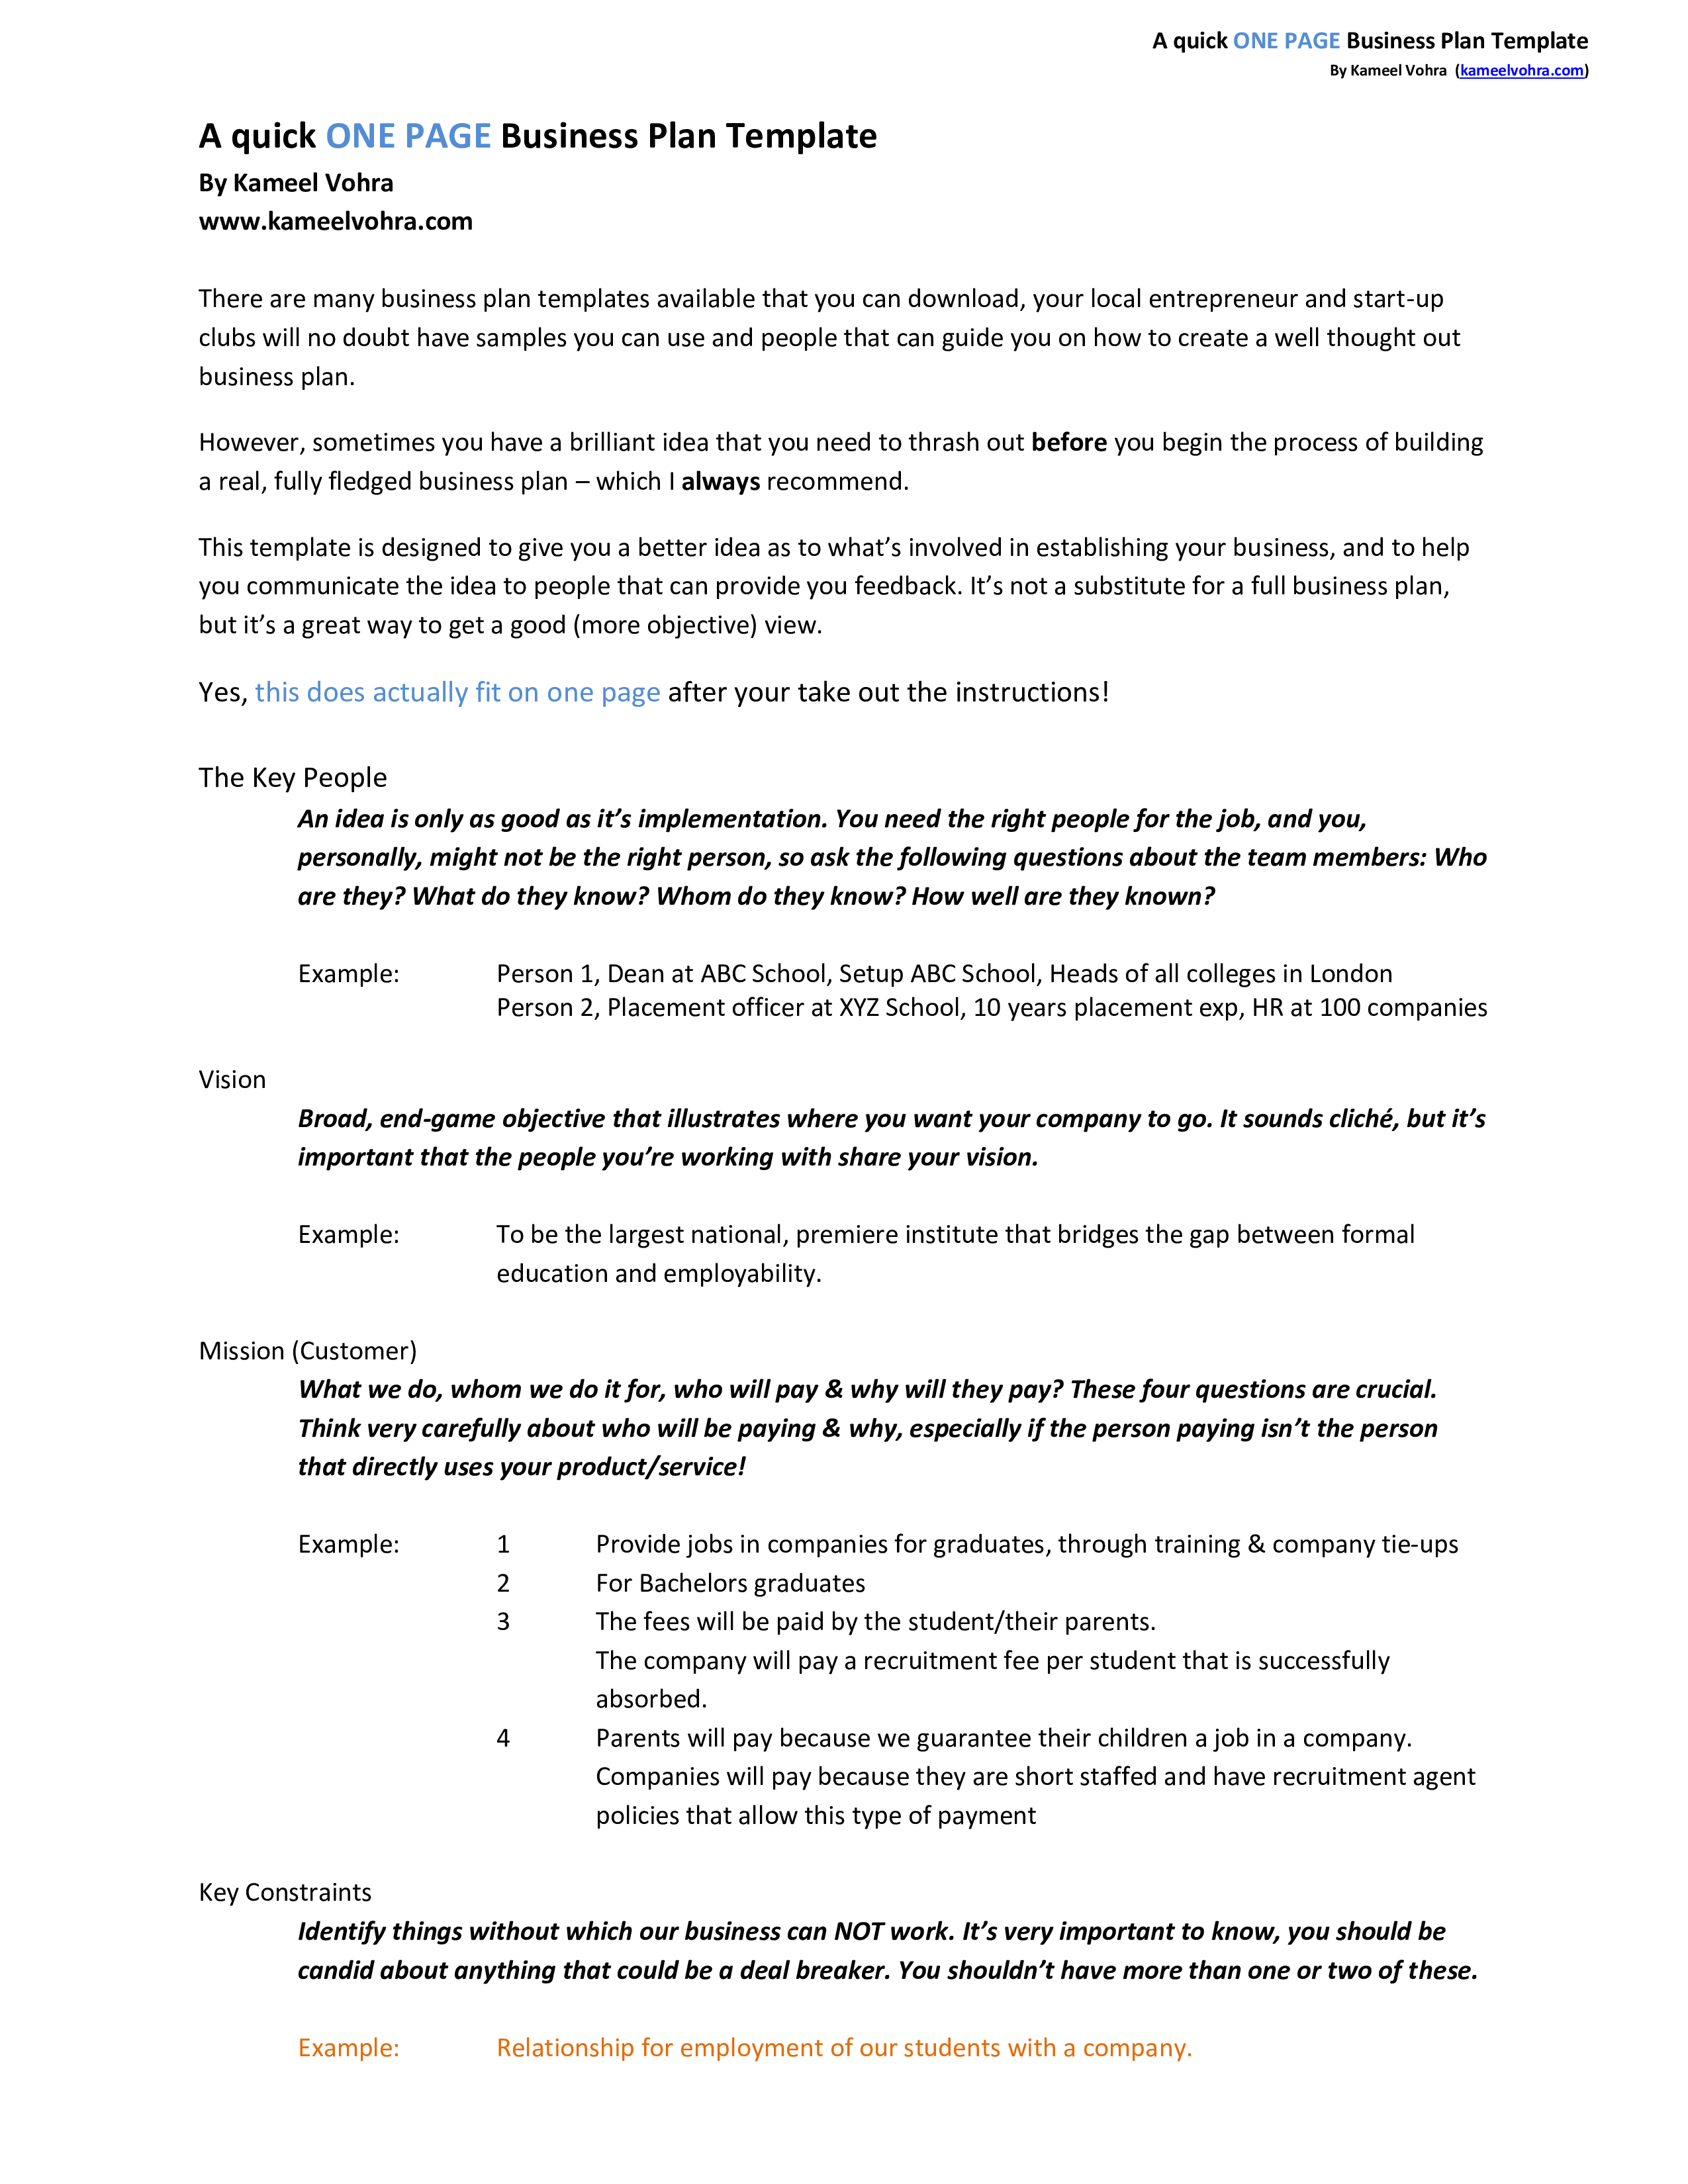 A Quick One Page Business Plan Template - Eloquens Inside Customer Service Business Plan Template